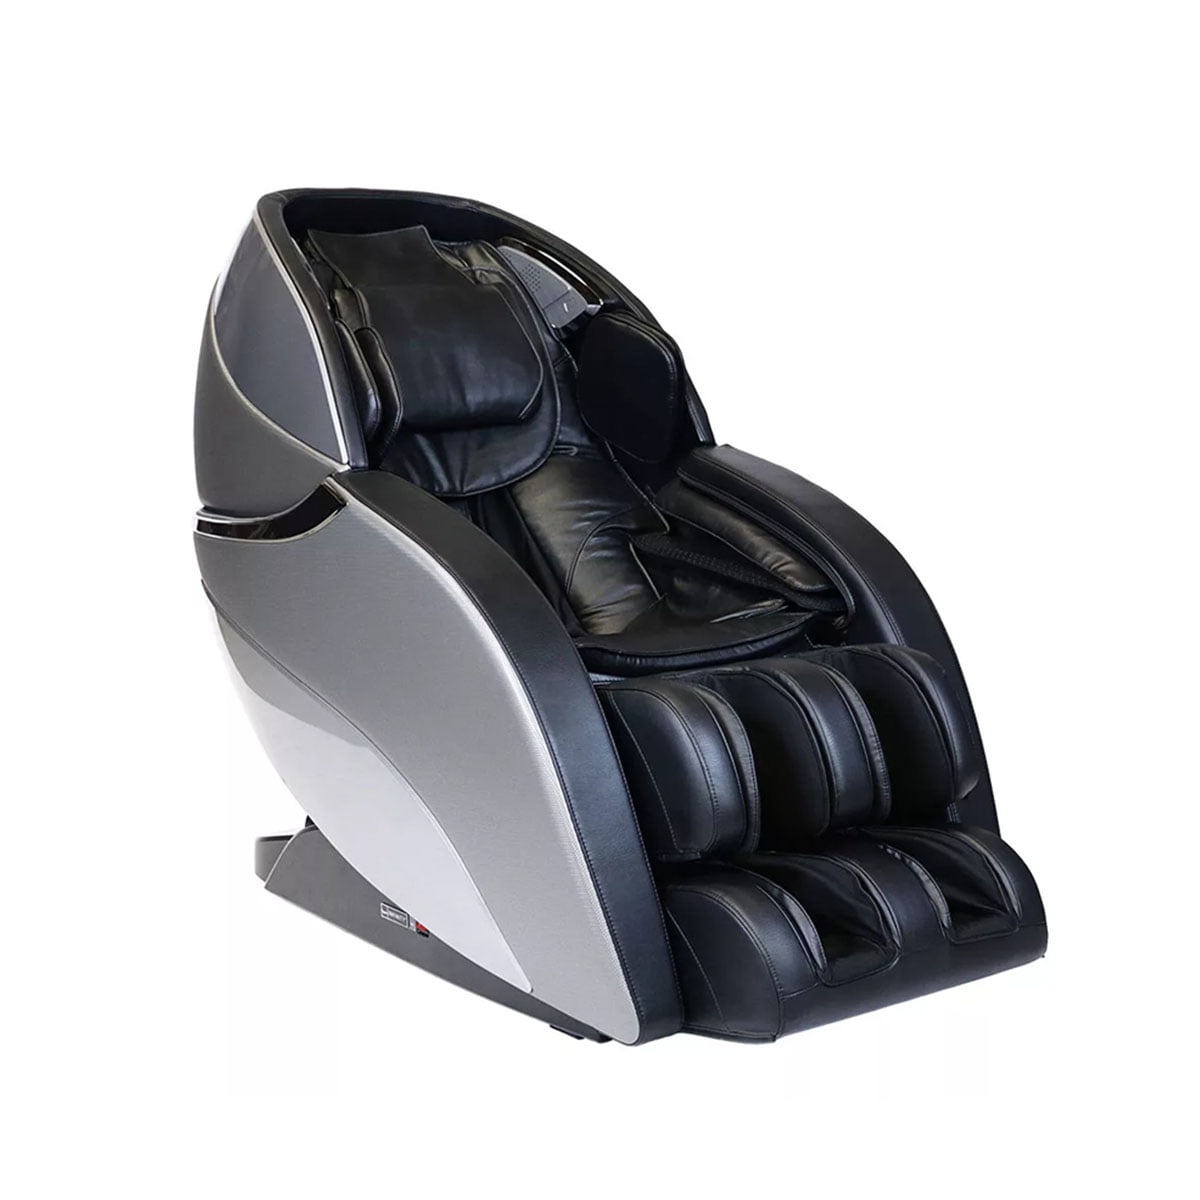 Compare Top-Quality Massage Chairs | Massage Chair Relief